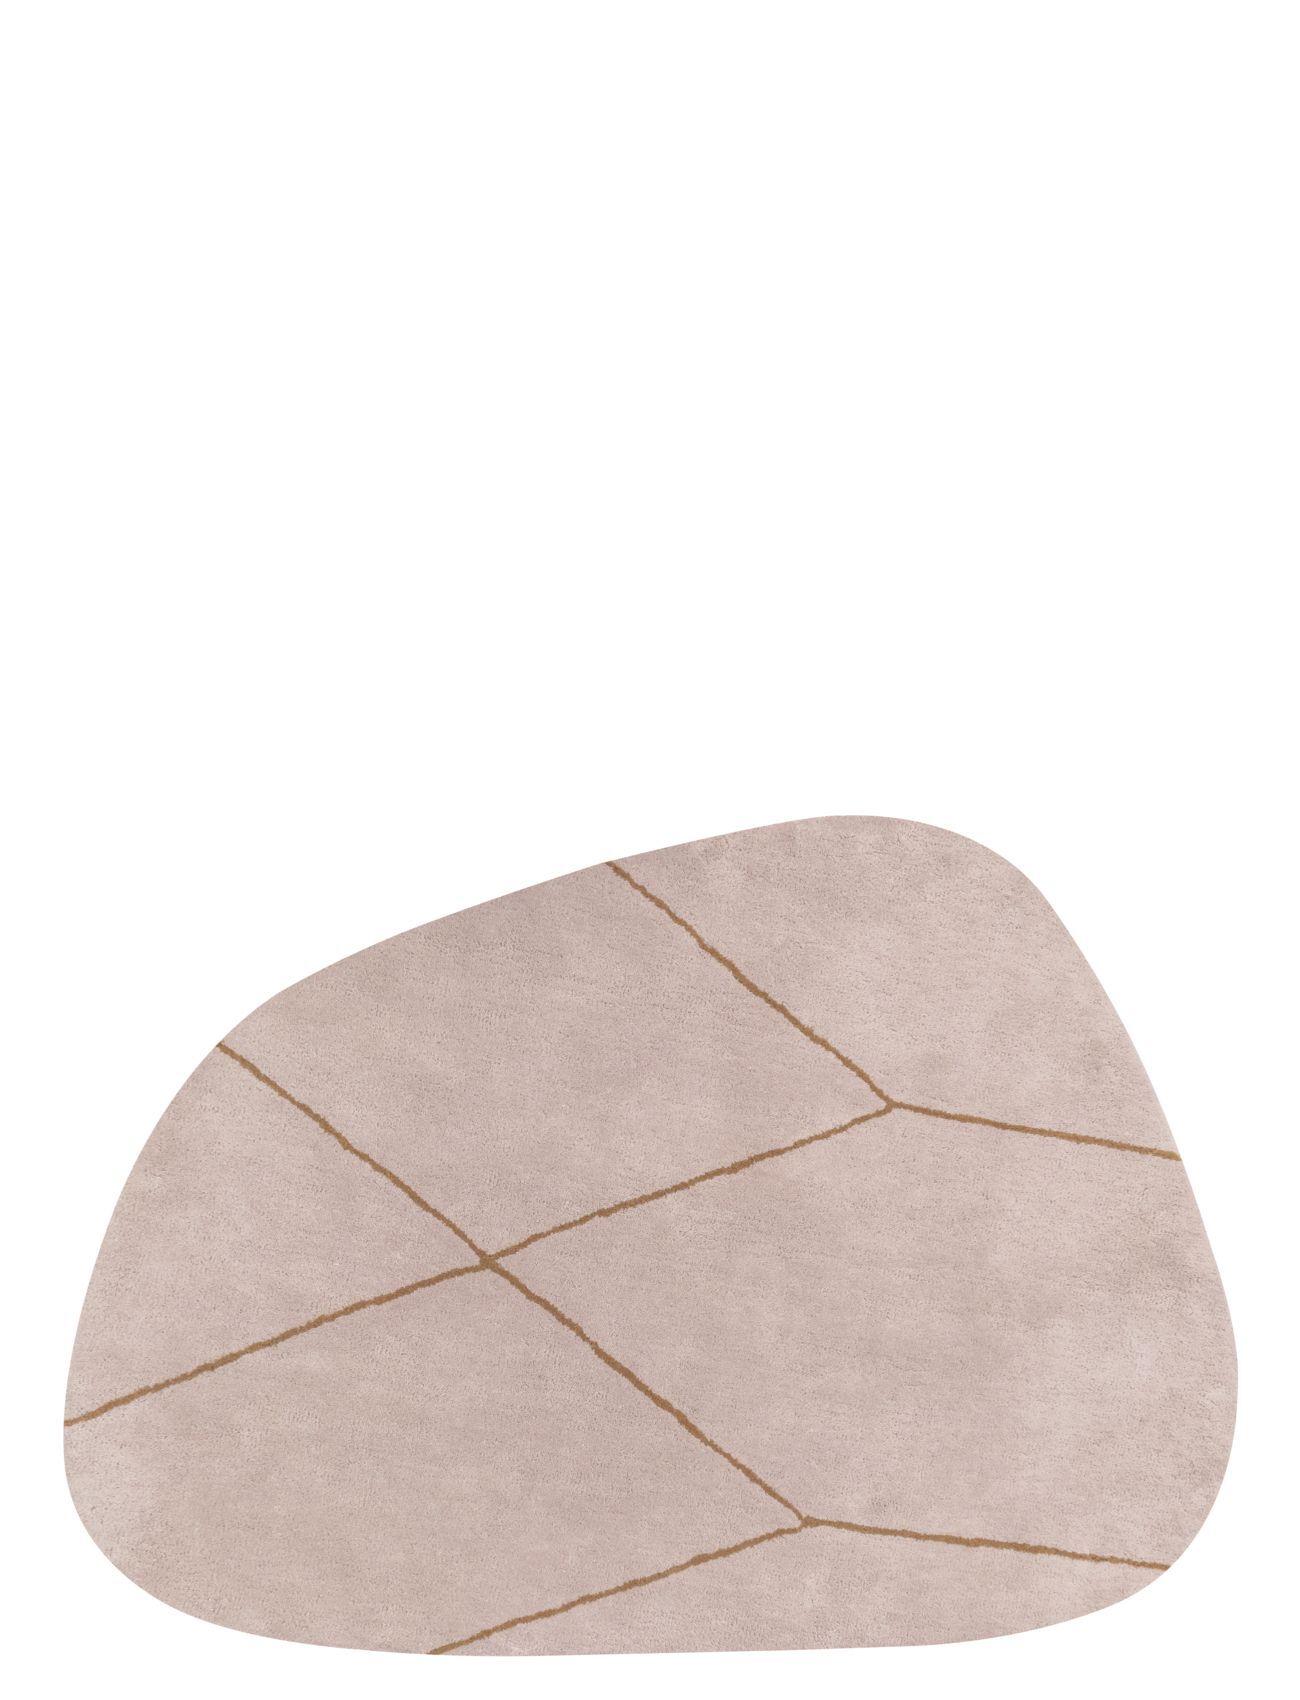 Mette Ditmer Shape Carpet, Small Home Textiles Rugs & Carpets Other Rugs Rosa Mette Ditmer